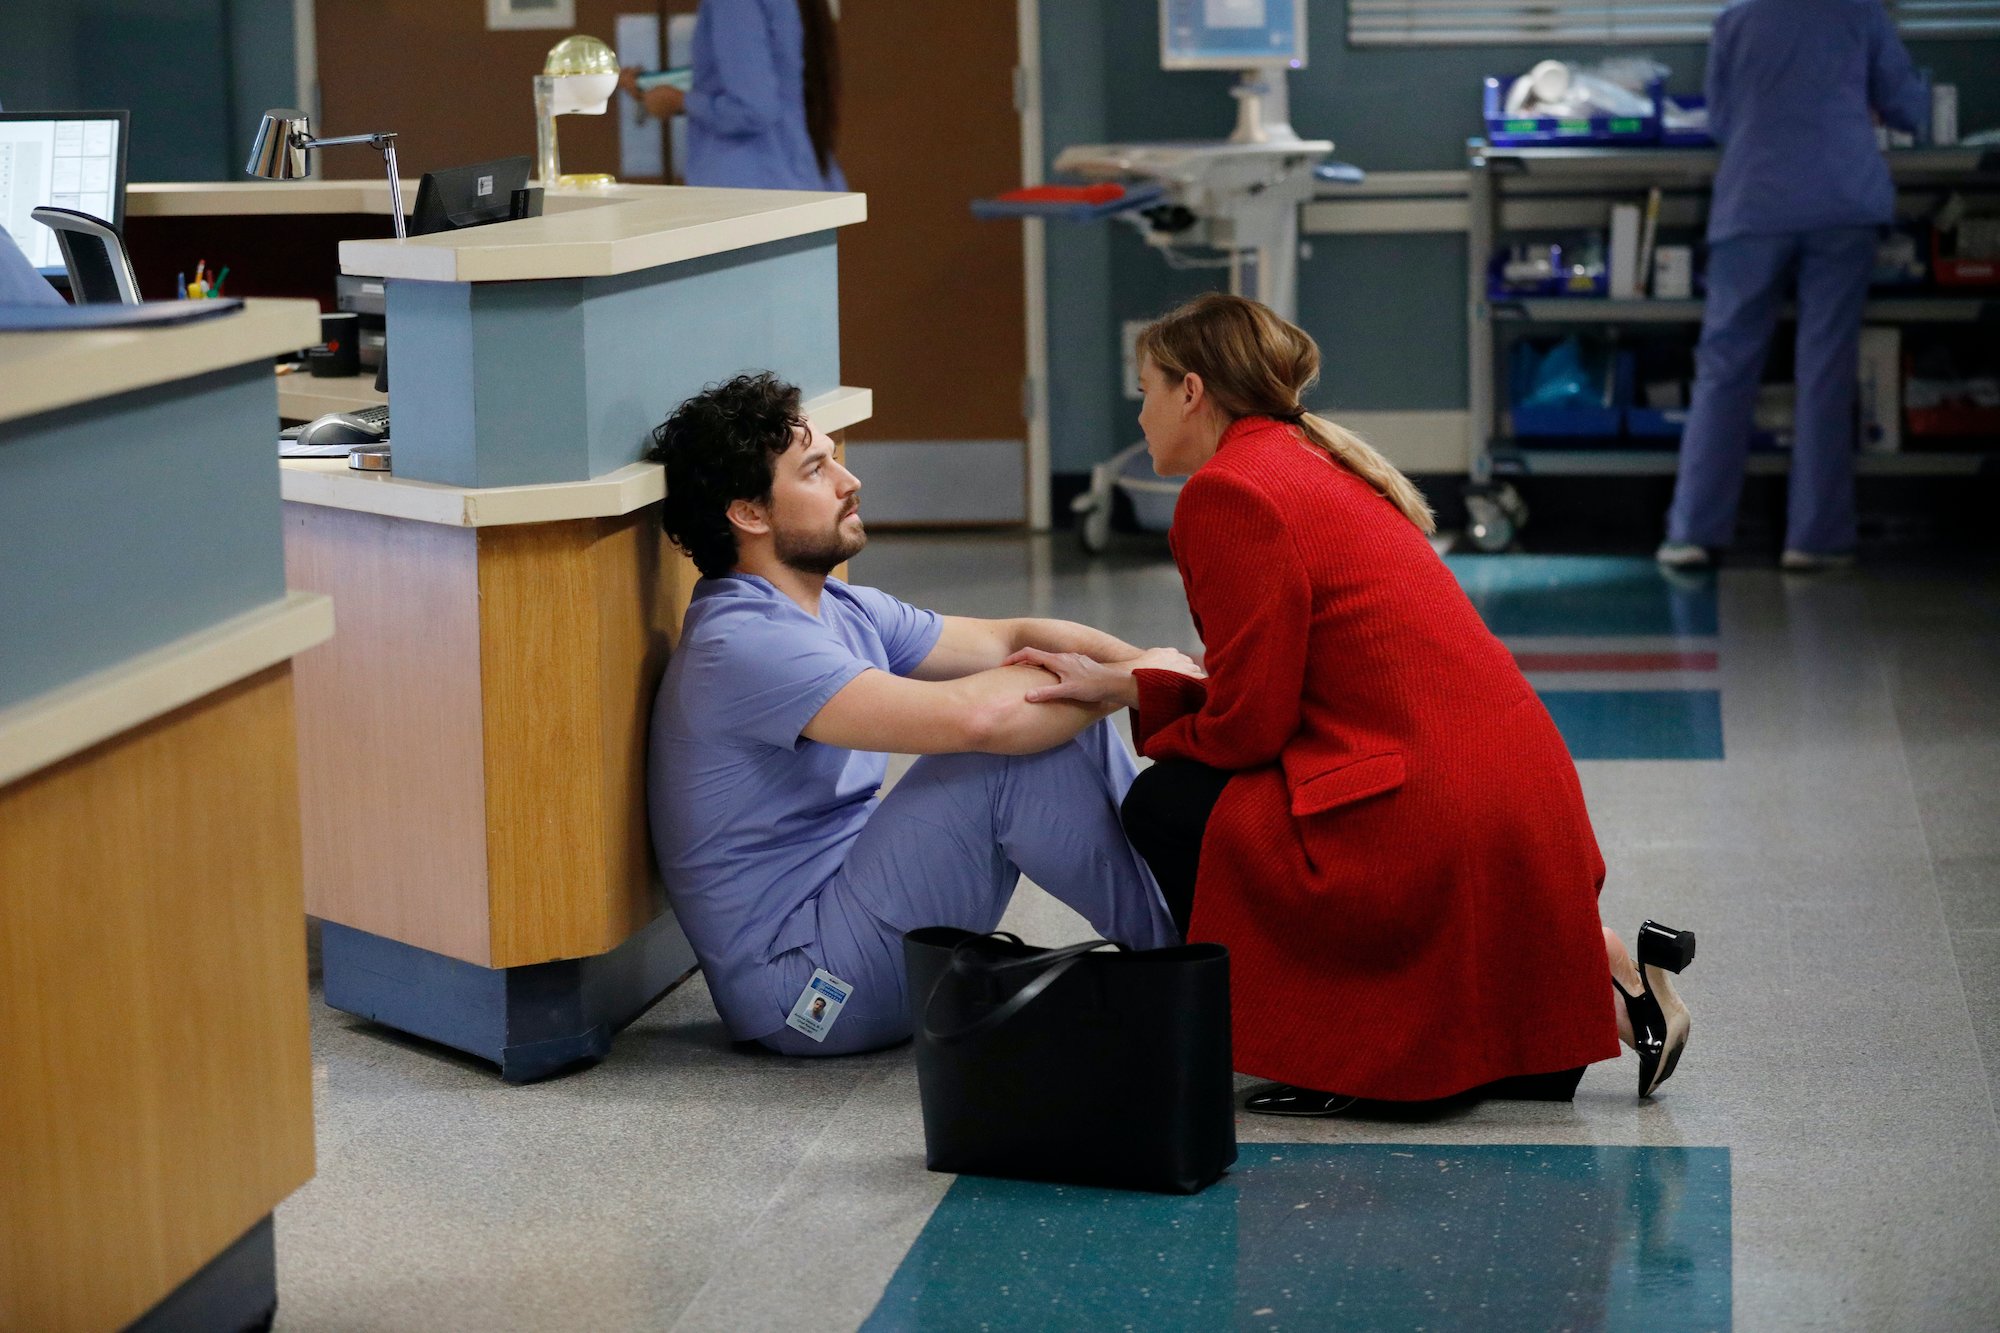 ‘Grey’s Anatomy’ Fans Feel Overwhelmed With Underdeveloped Minor Roles